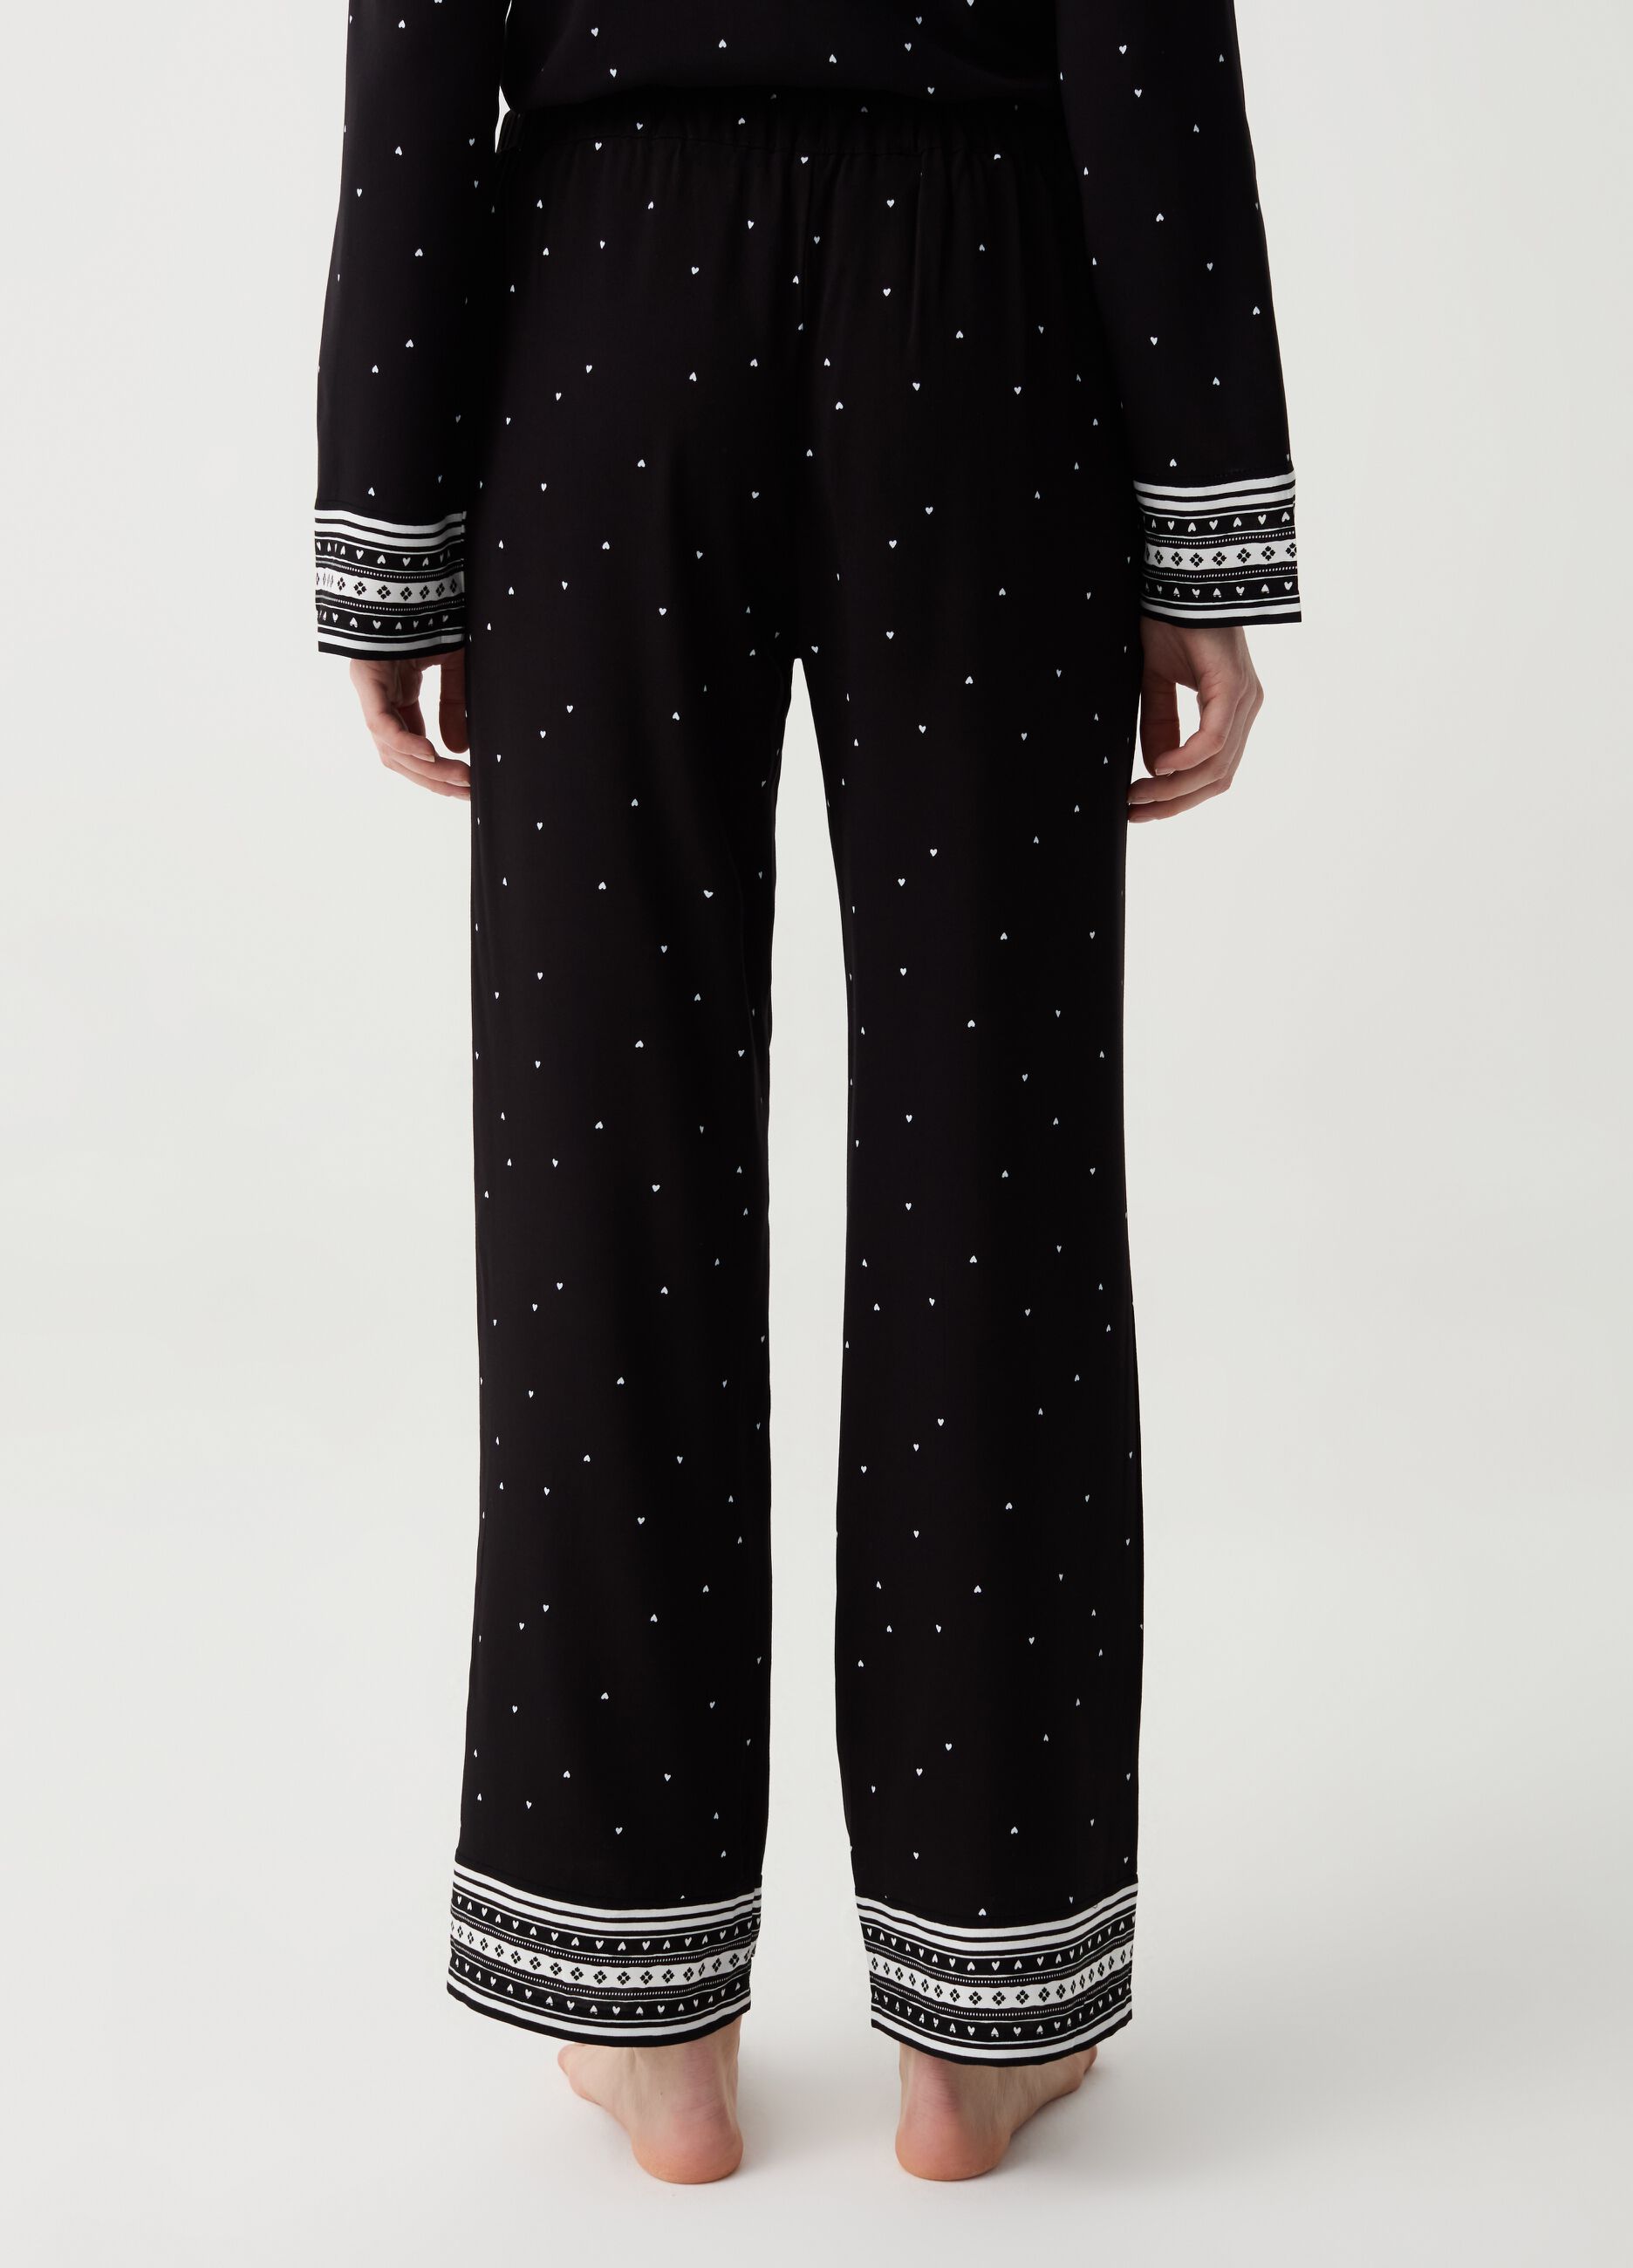 Pyjama trousers with small hearts print